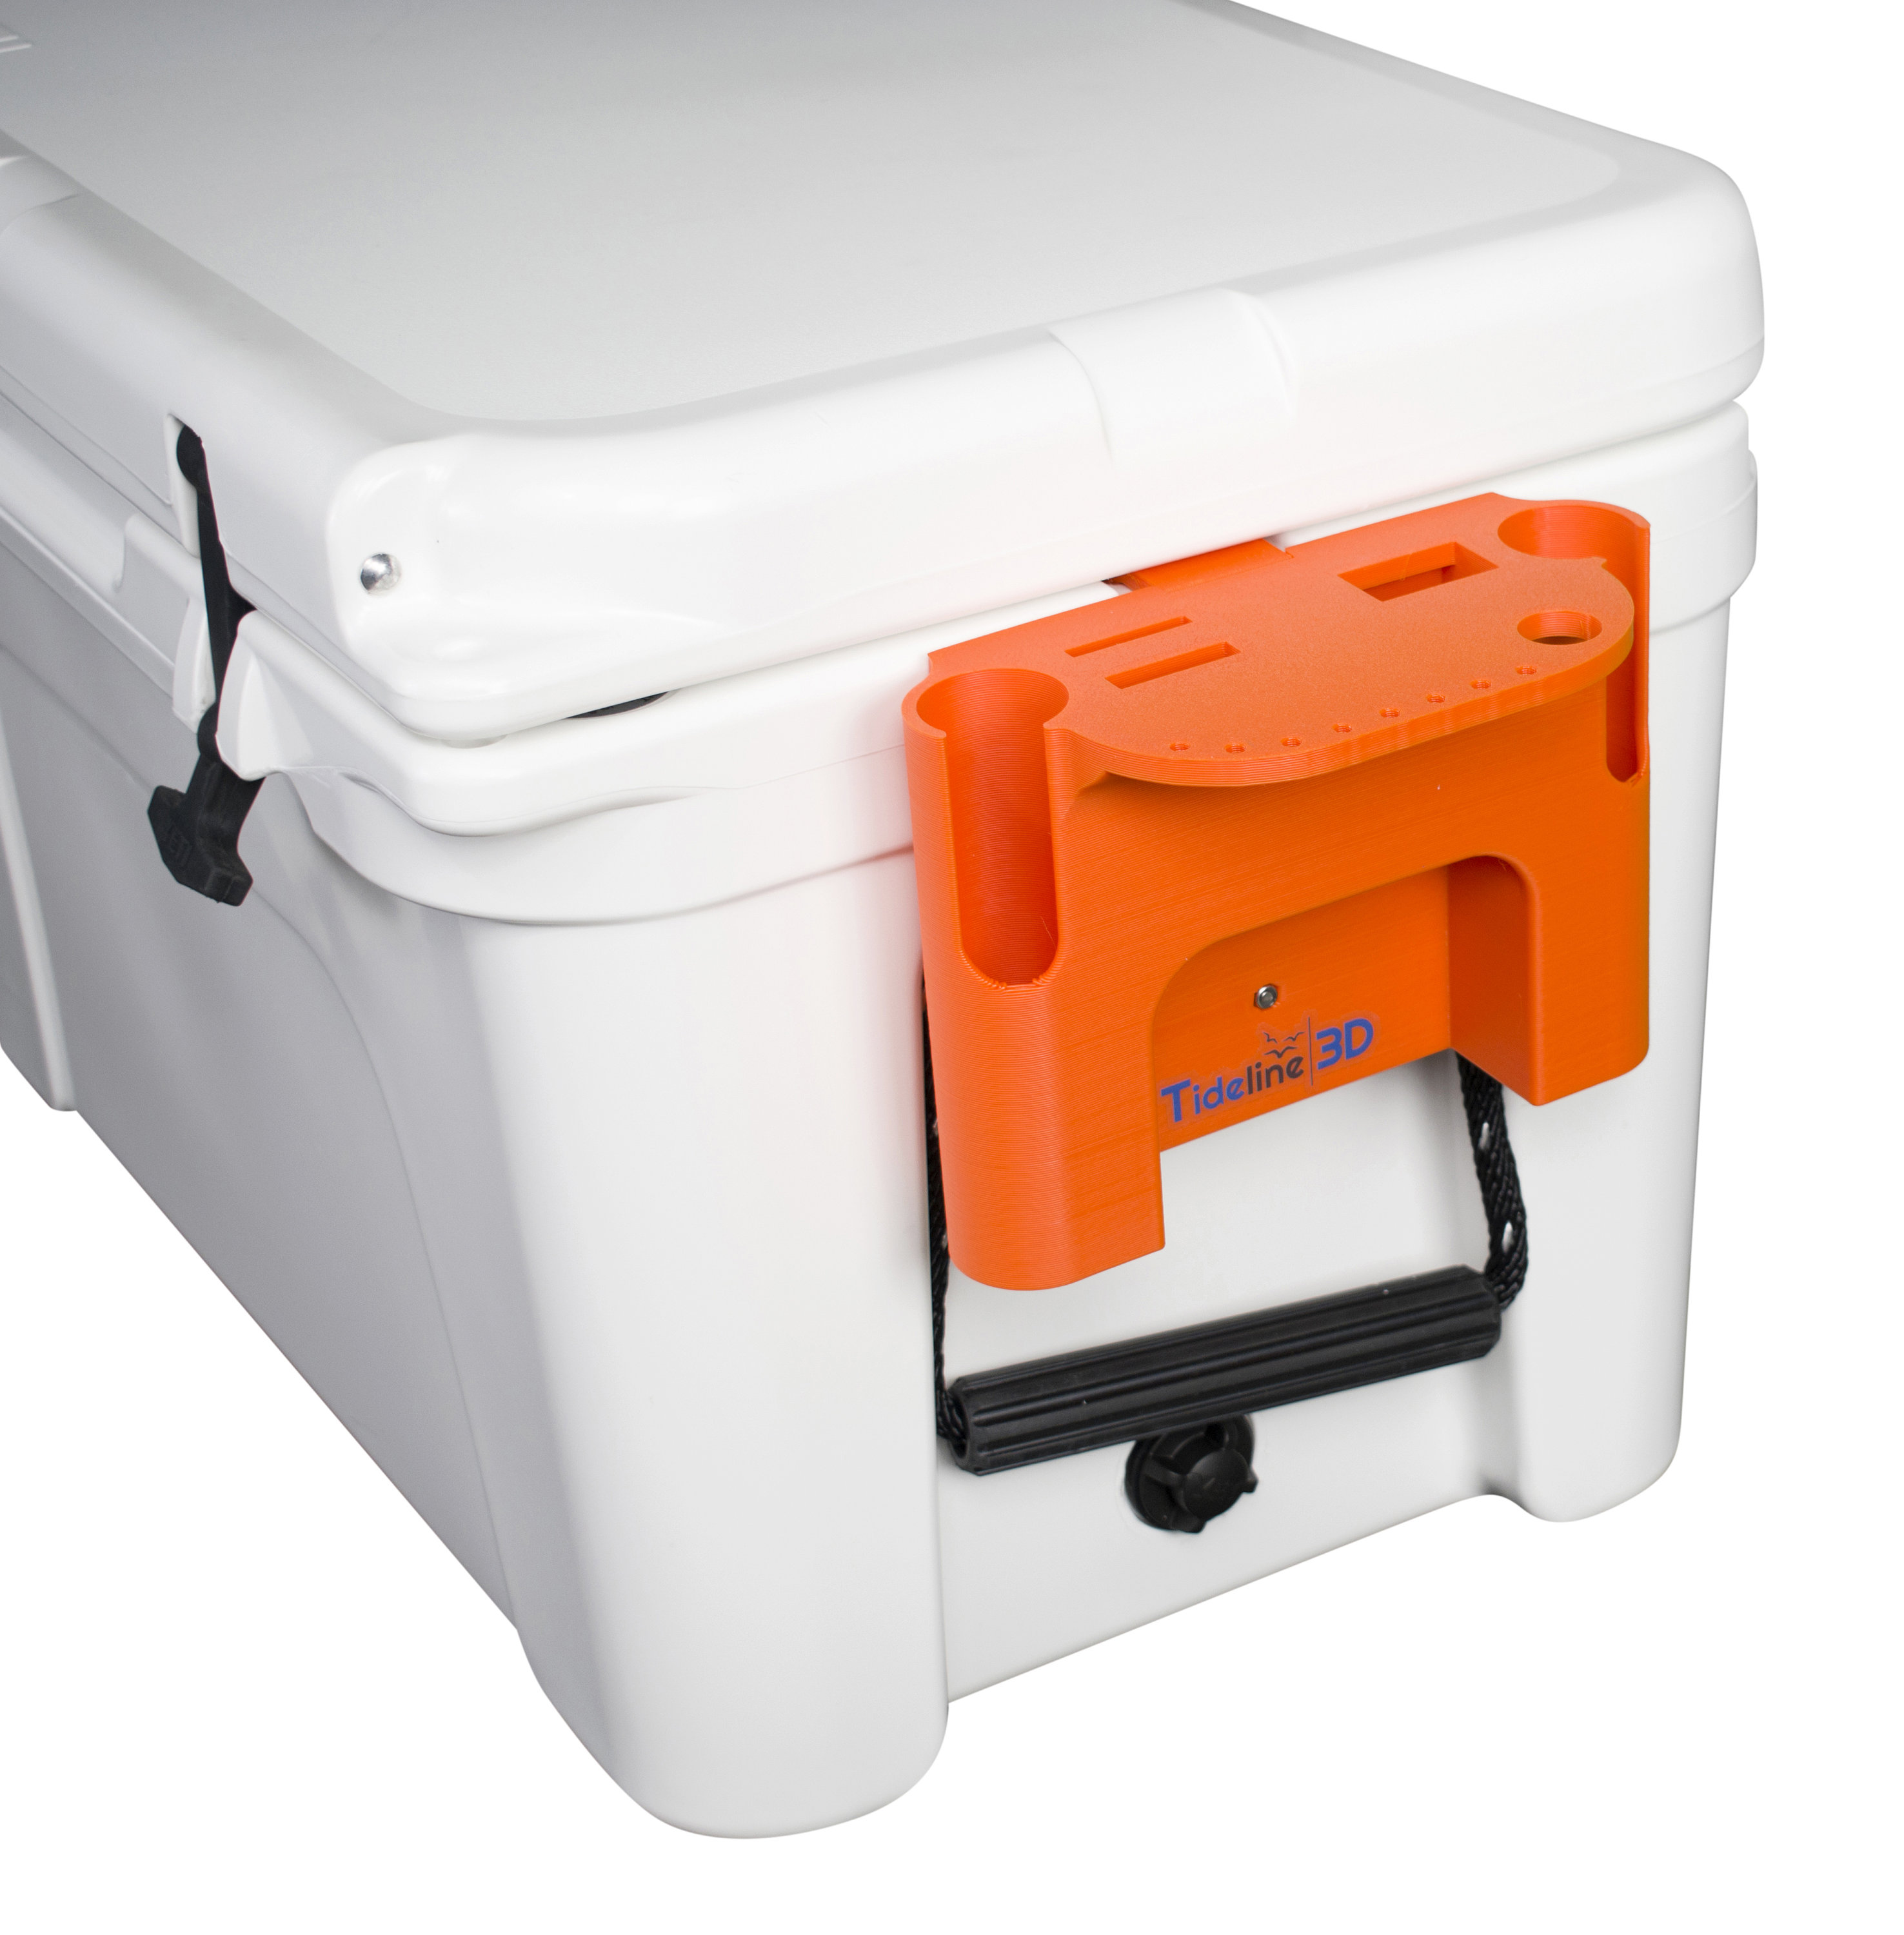 Rod Holder for Yeti Tundra Coolers -  Canada